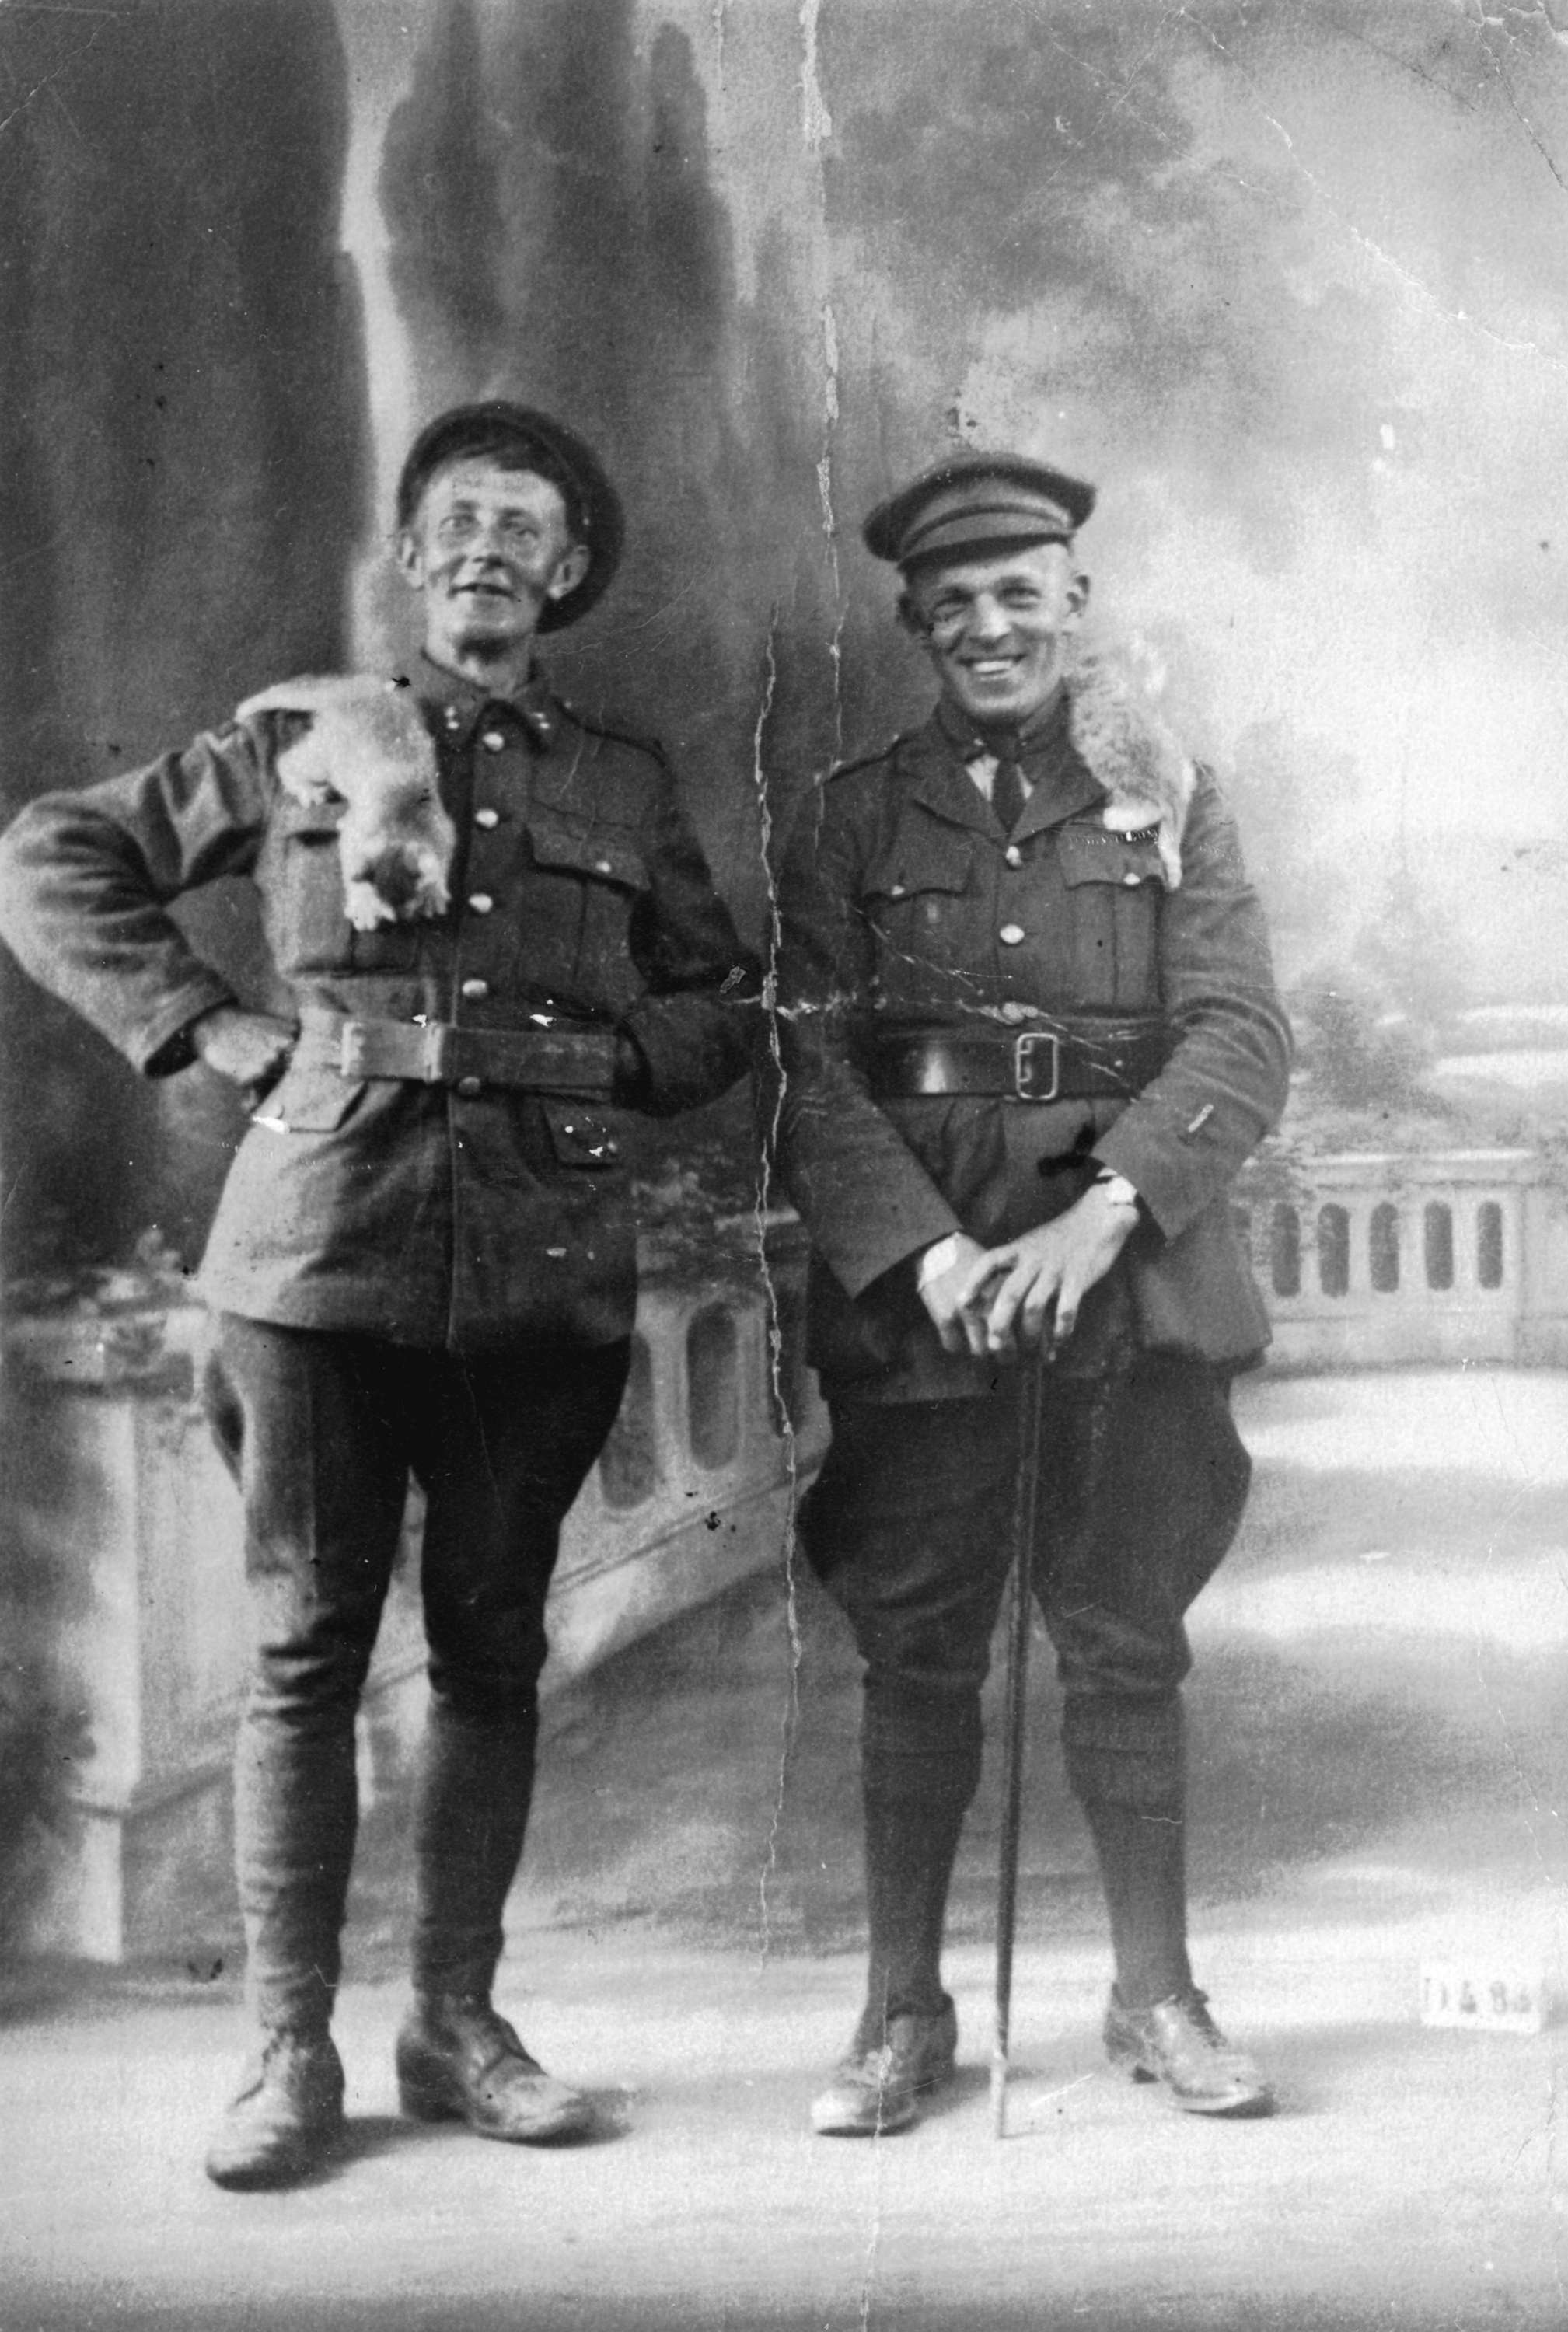 Two young men in military uniforms pose in a photo studio. Each has a cat on his shoulder.